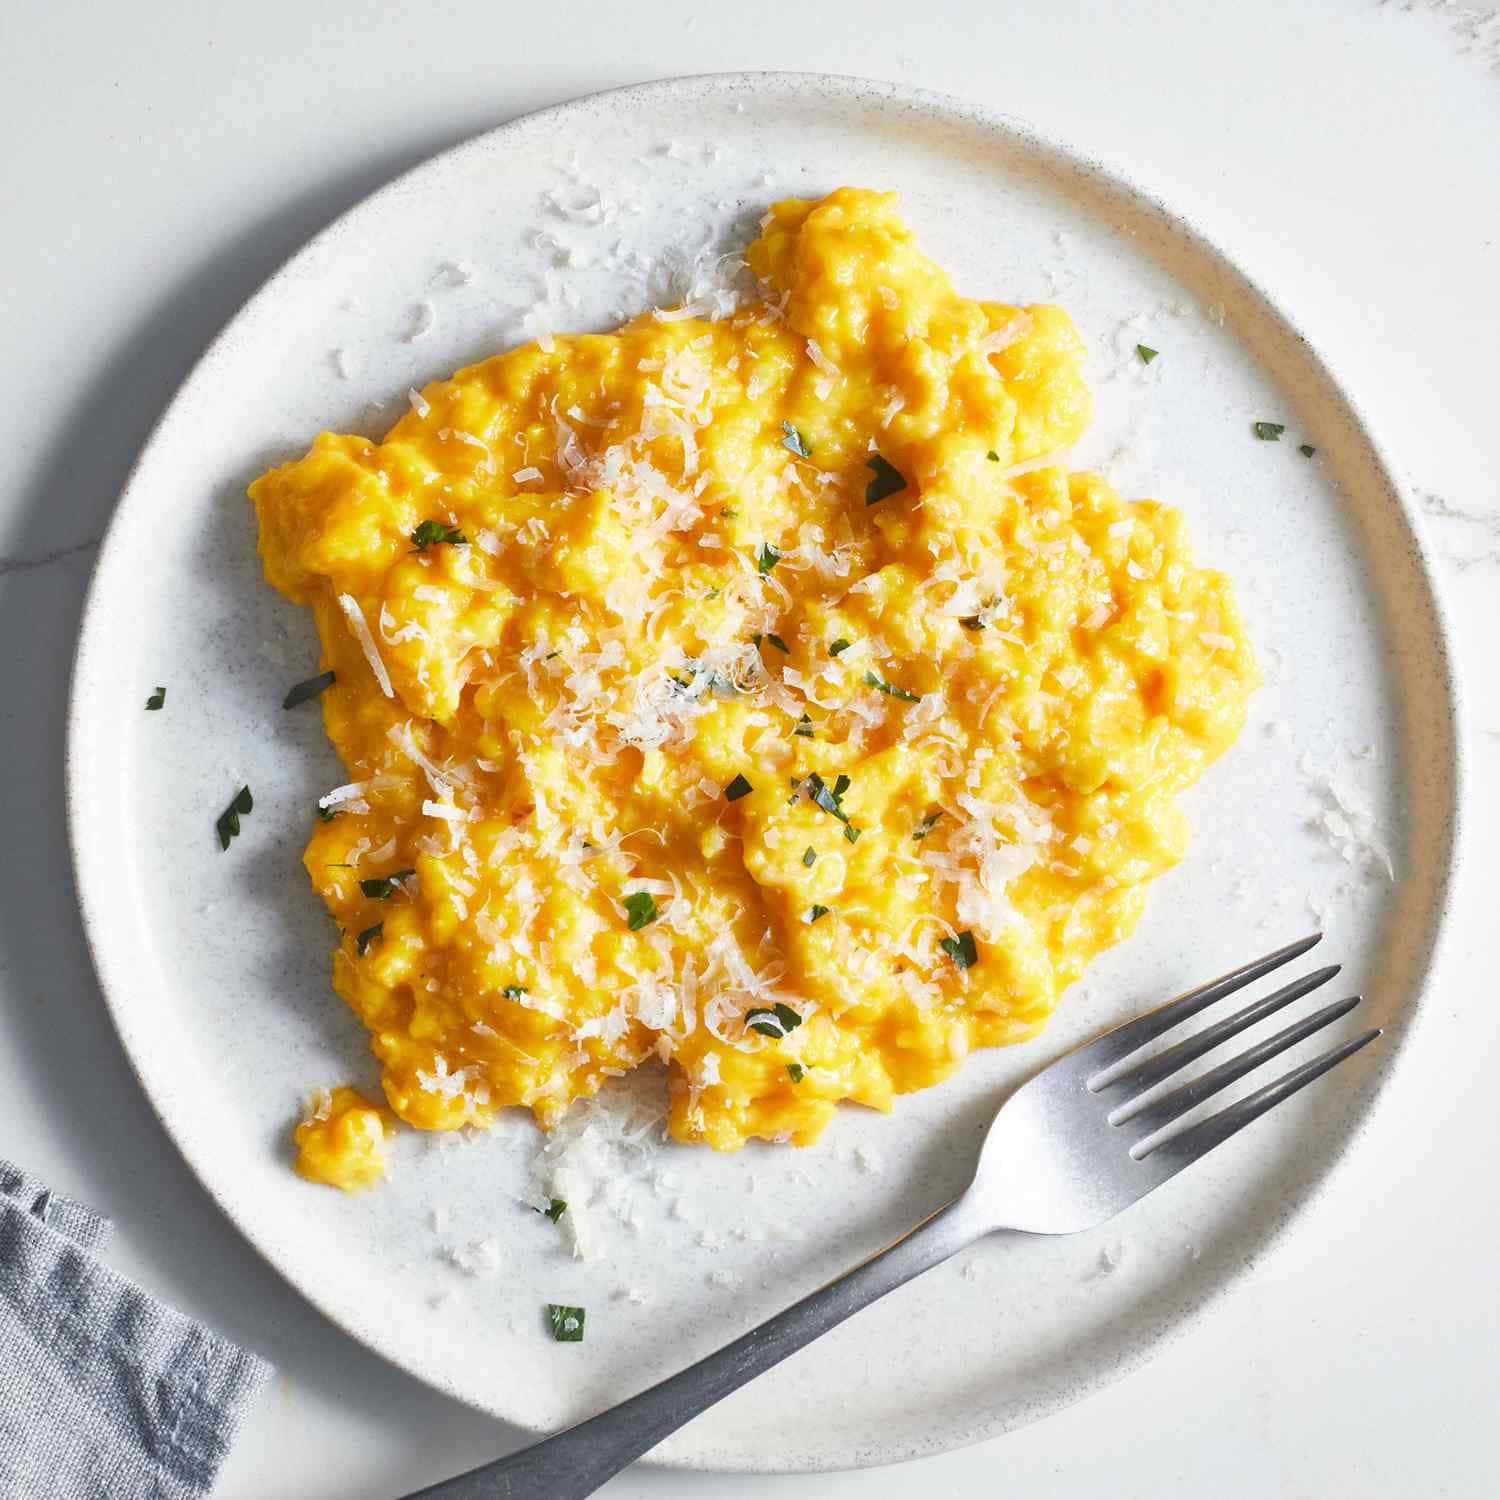 A delicious plate of scrambled eggs